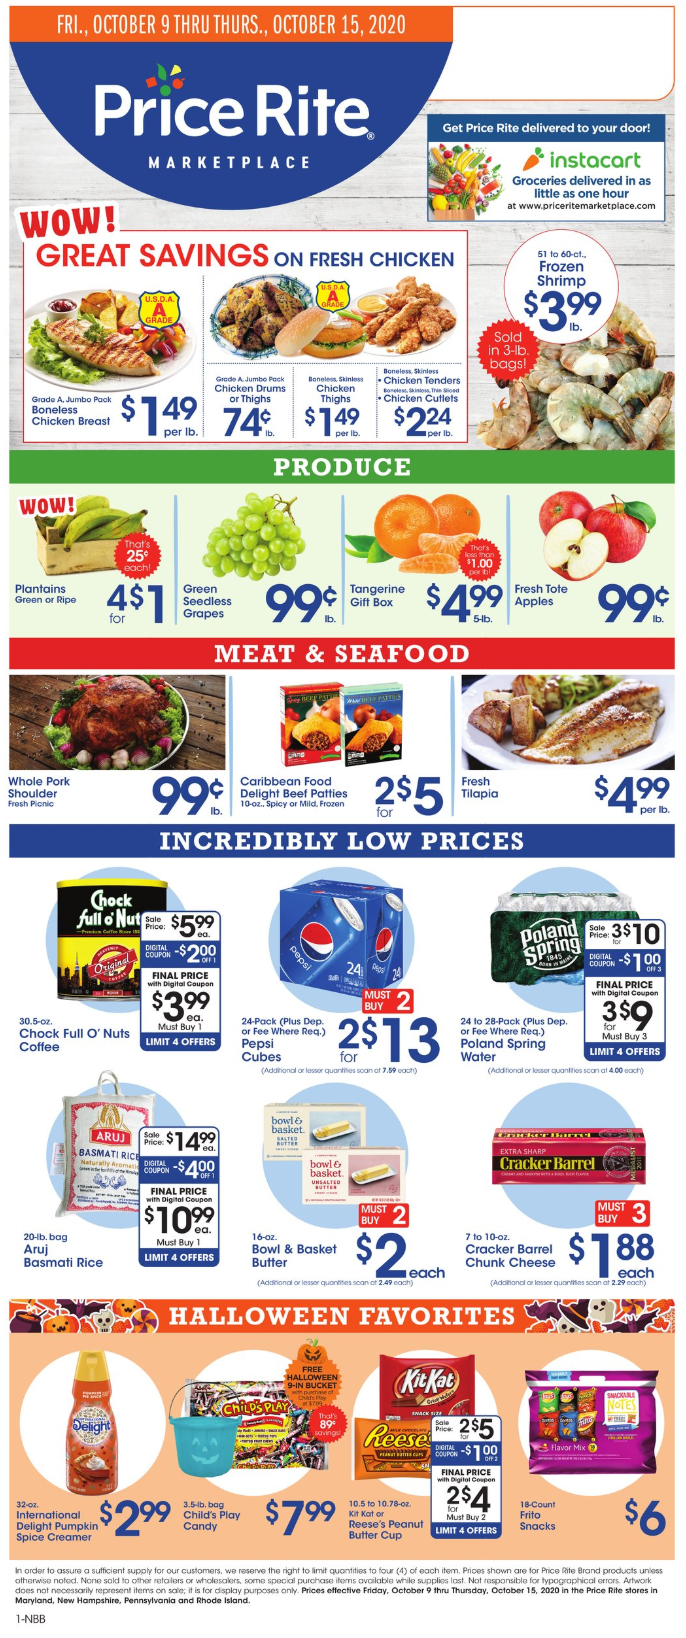 Price Rite Weekly Ad Oct 09 Oct 15 2020